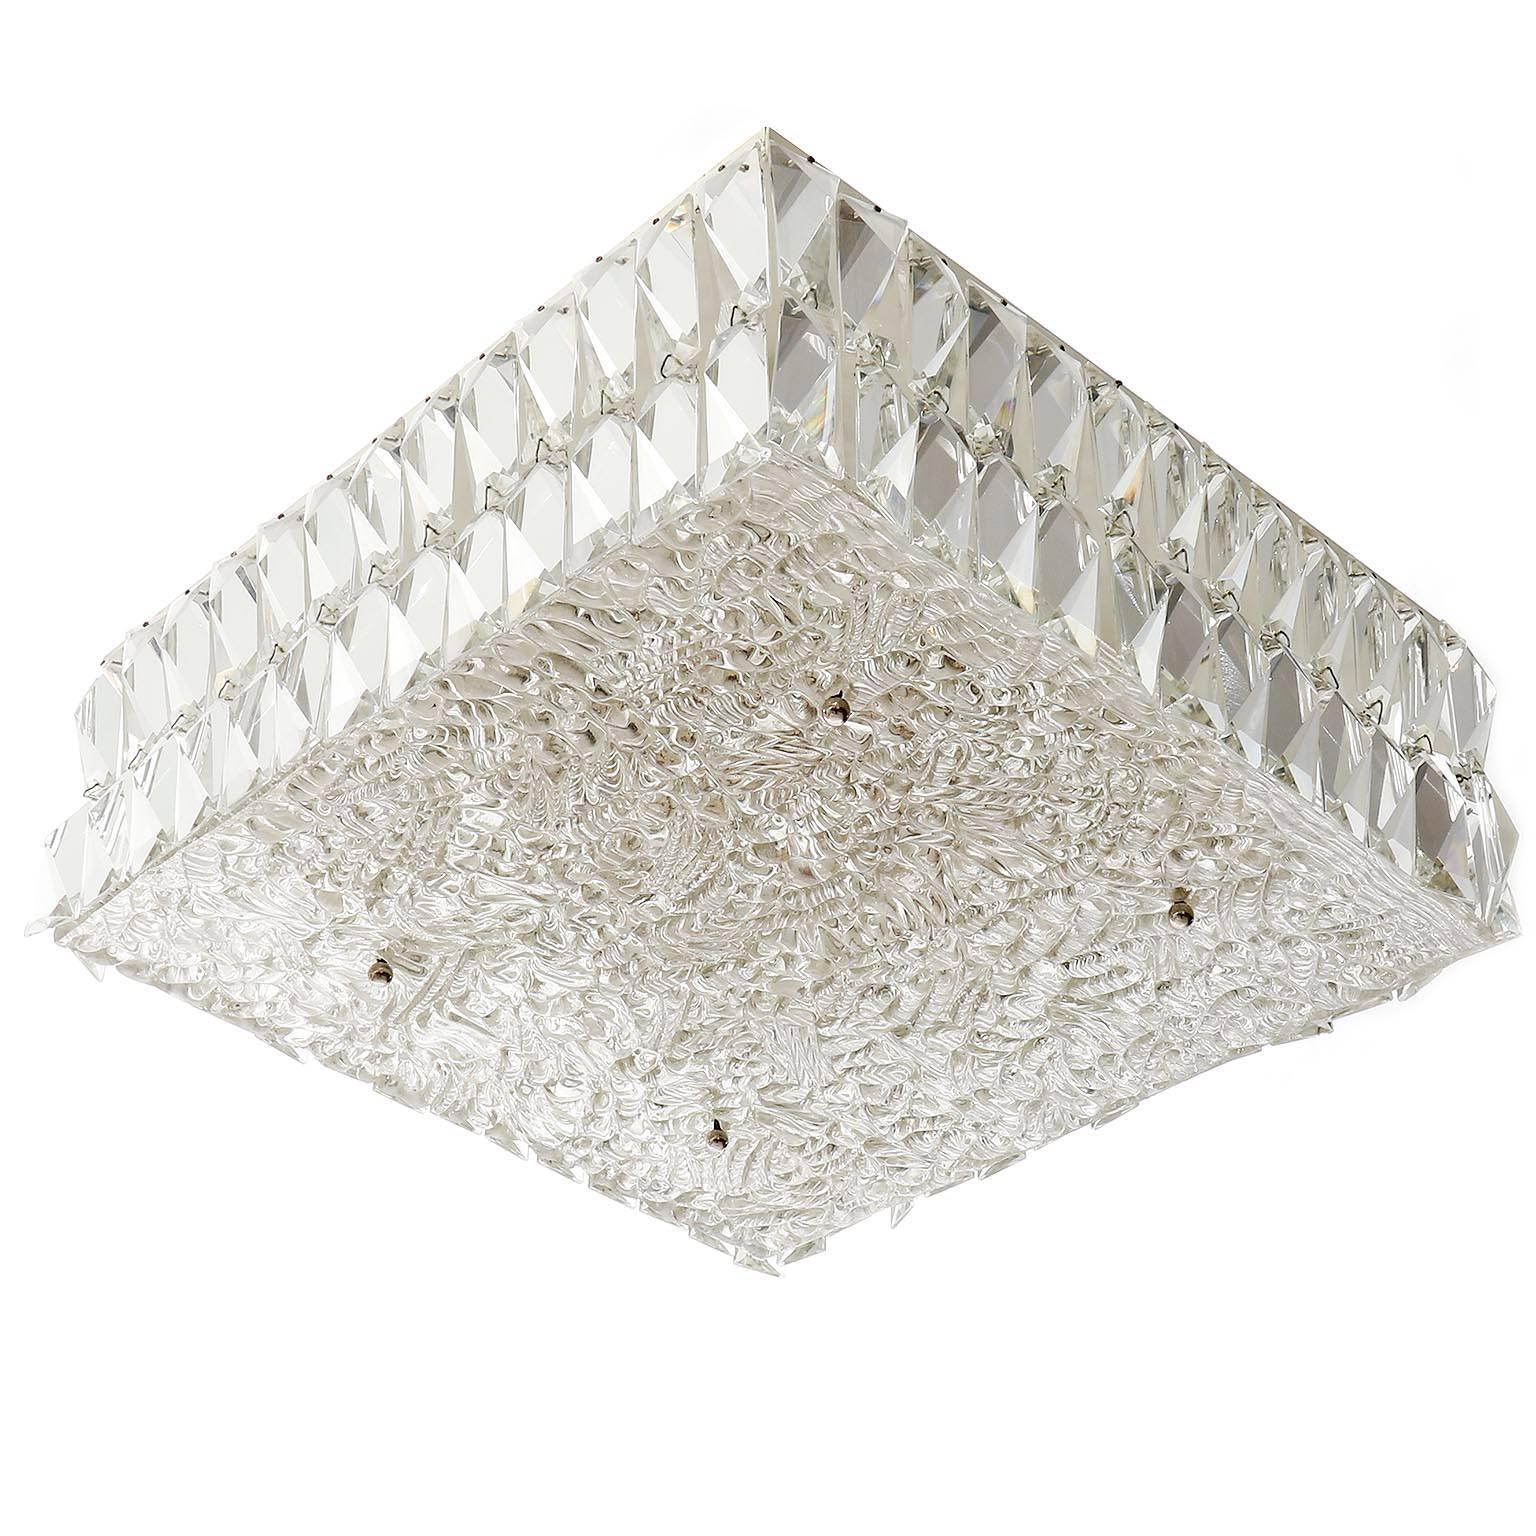 Square Kalmar Light Fixture, Textured and Crystal Glass, 1960s, One of Two